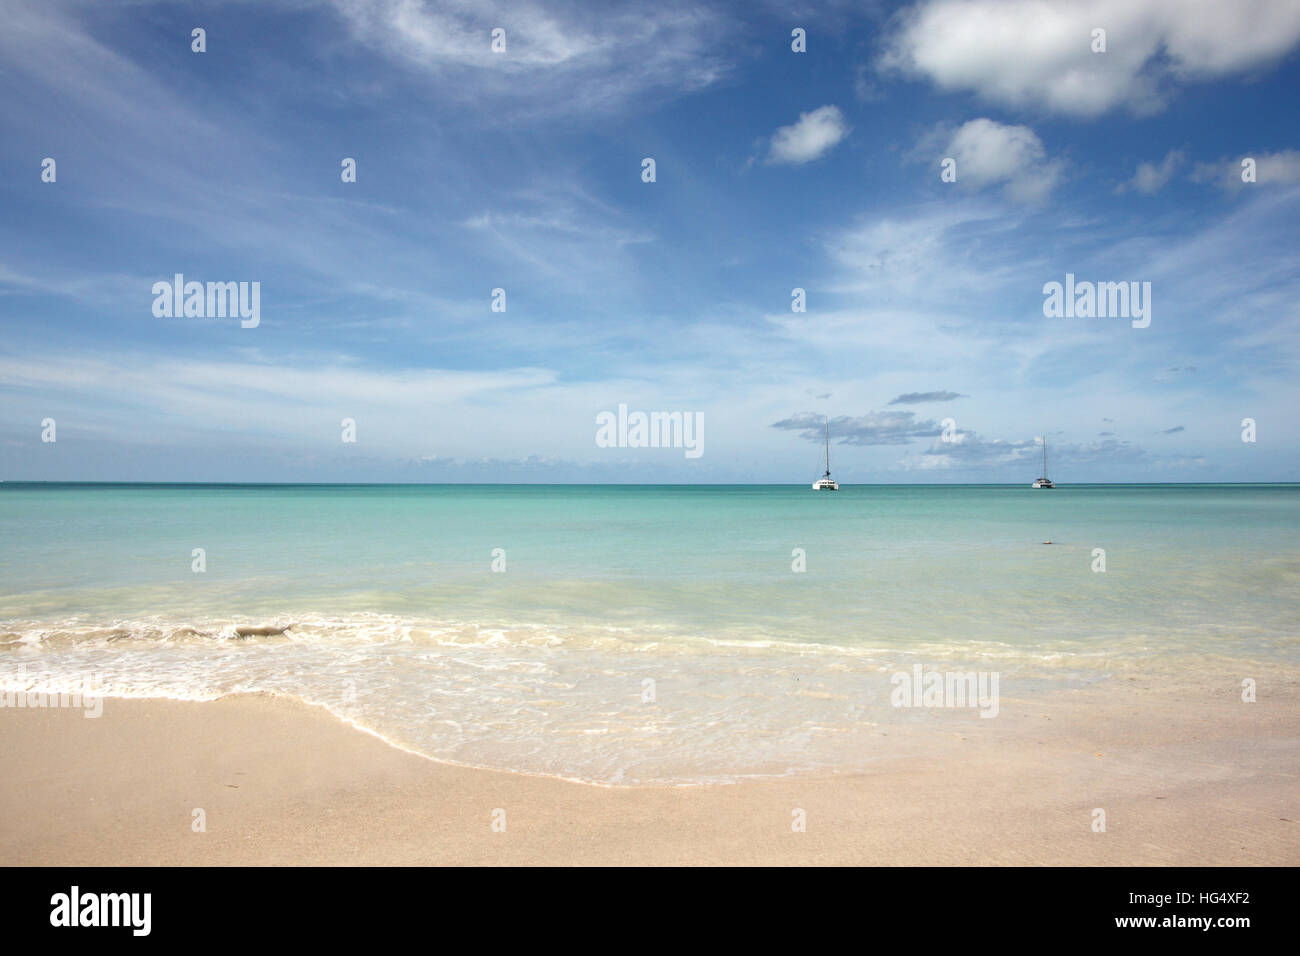 View out to sea with a view over beautiful Runaway beach in Antigua, Caribbean. Stock Photo